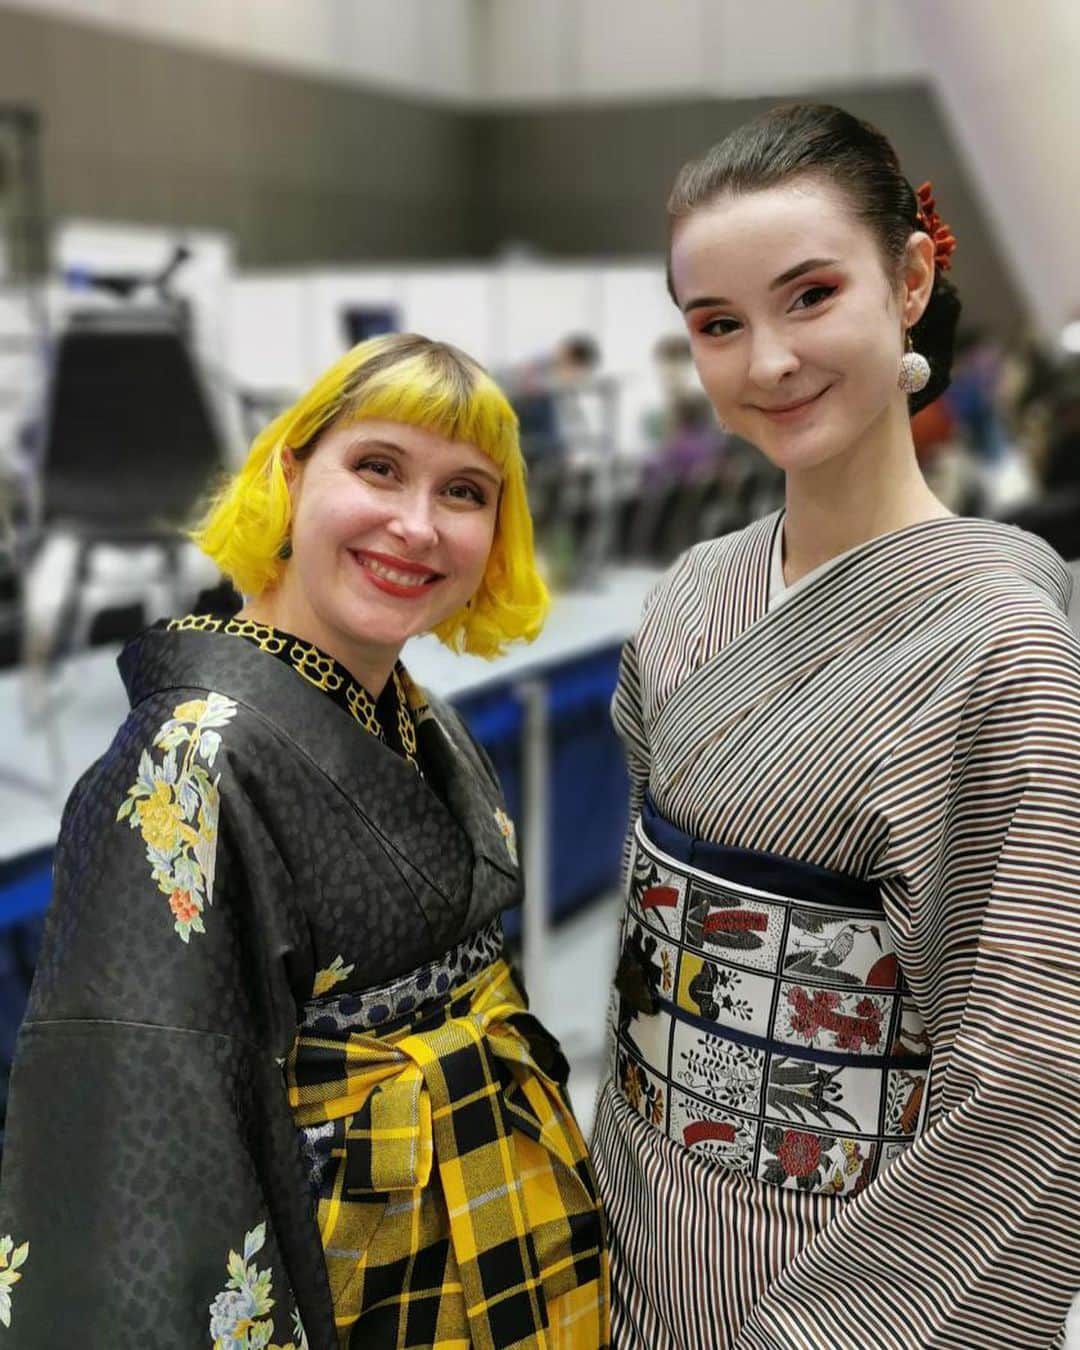 Anji SALZのインスタグラム：「Totally forgot to post these from last autumn when I met @asayuri_rin and @teawitchjo 😂 That’s how lazy I got with social media 😴😝 Loved the hanafuda obi btw! And always so nice to see other kimono friends at events ❤️‍🔥  #kimono #japan #japanesekimono #kimonoevent #kimonosalone #kimonostyle #hakama #pregnancyfashion #tokyofashion #和装 #和服 #着物 #着物コーディネート #きものサローネ #普段着物 #袴 #妊婦コーデ」